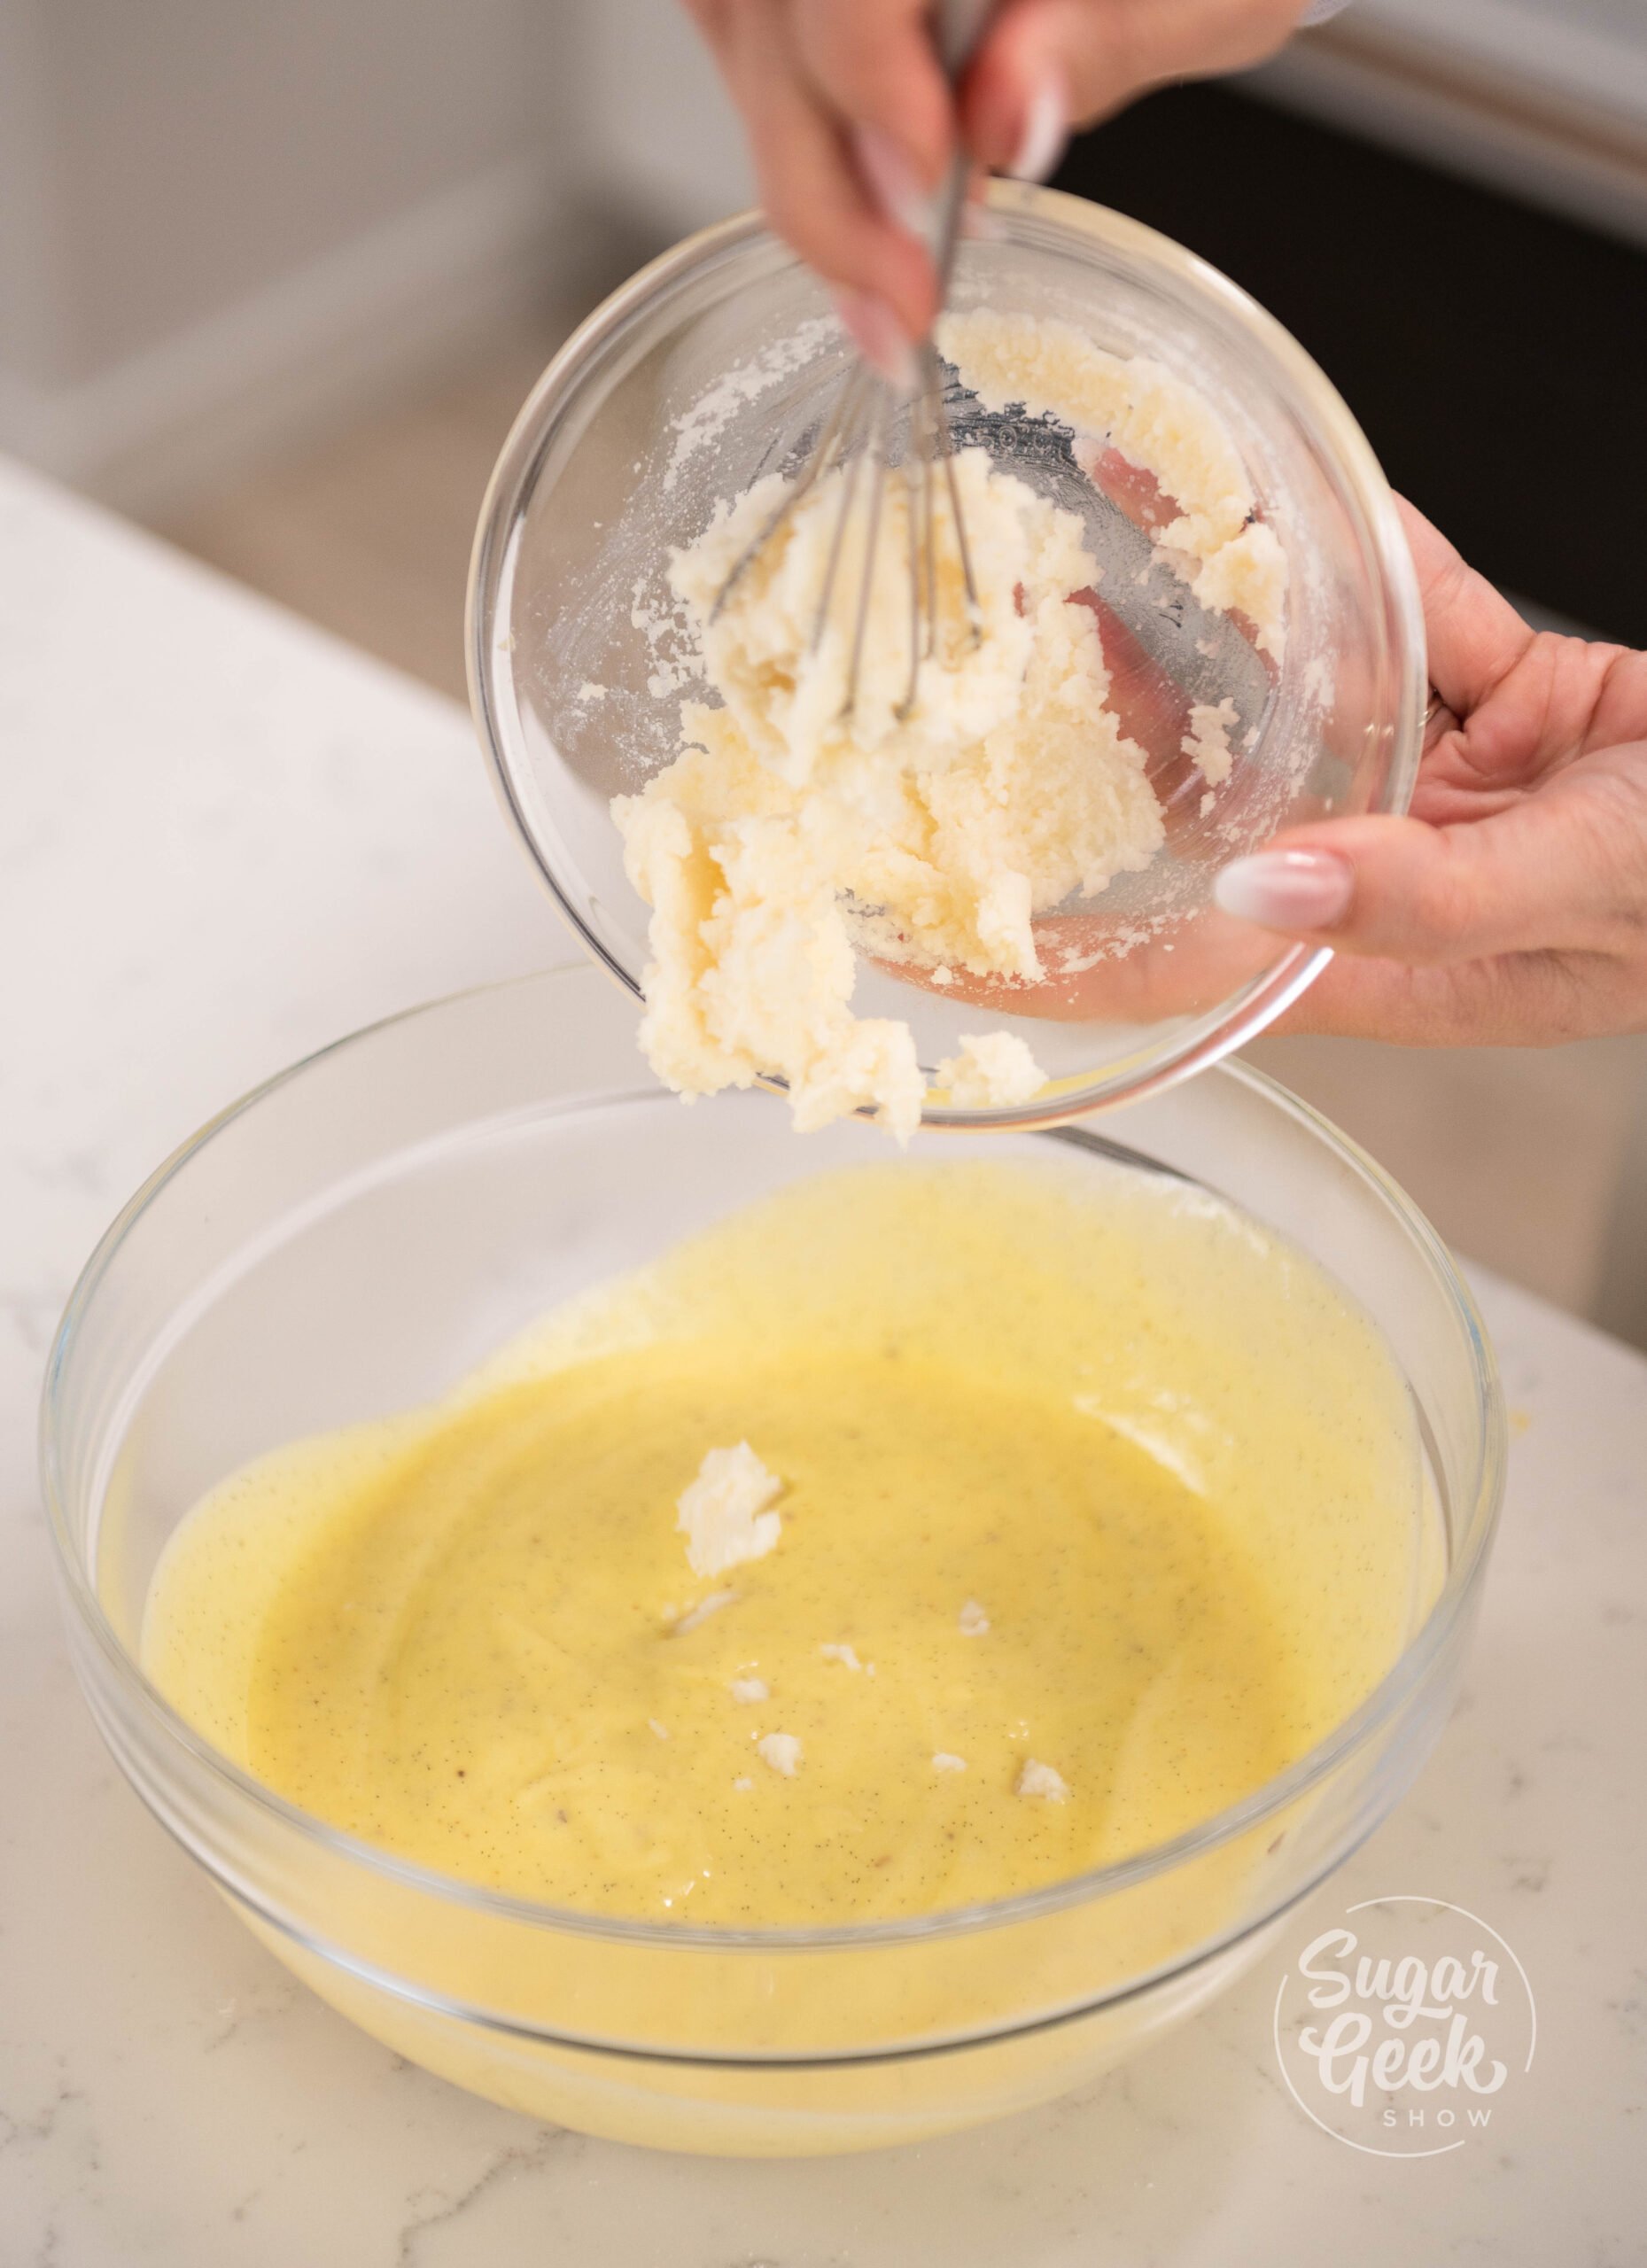 hand pouring bowl of gelatin into bowl of cream